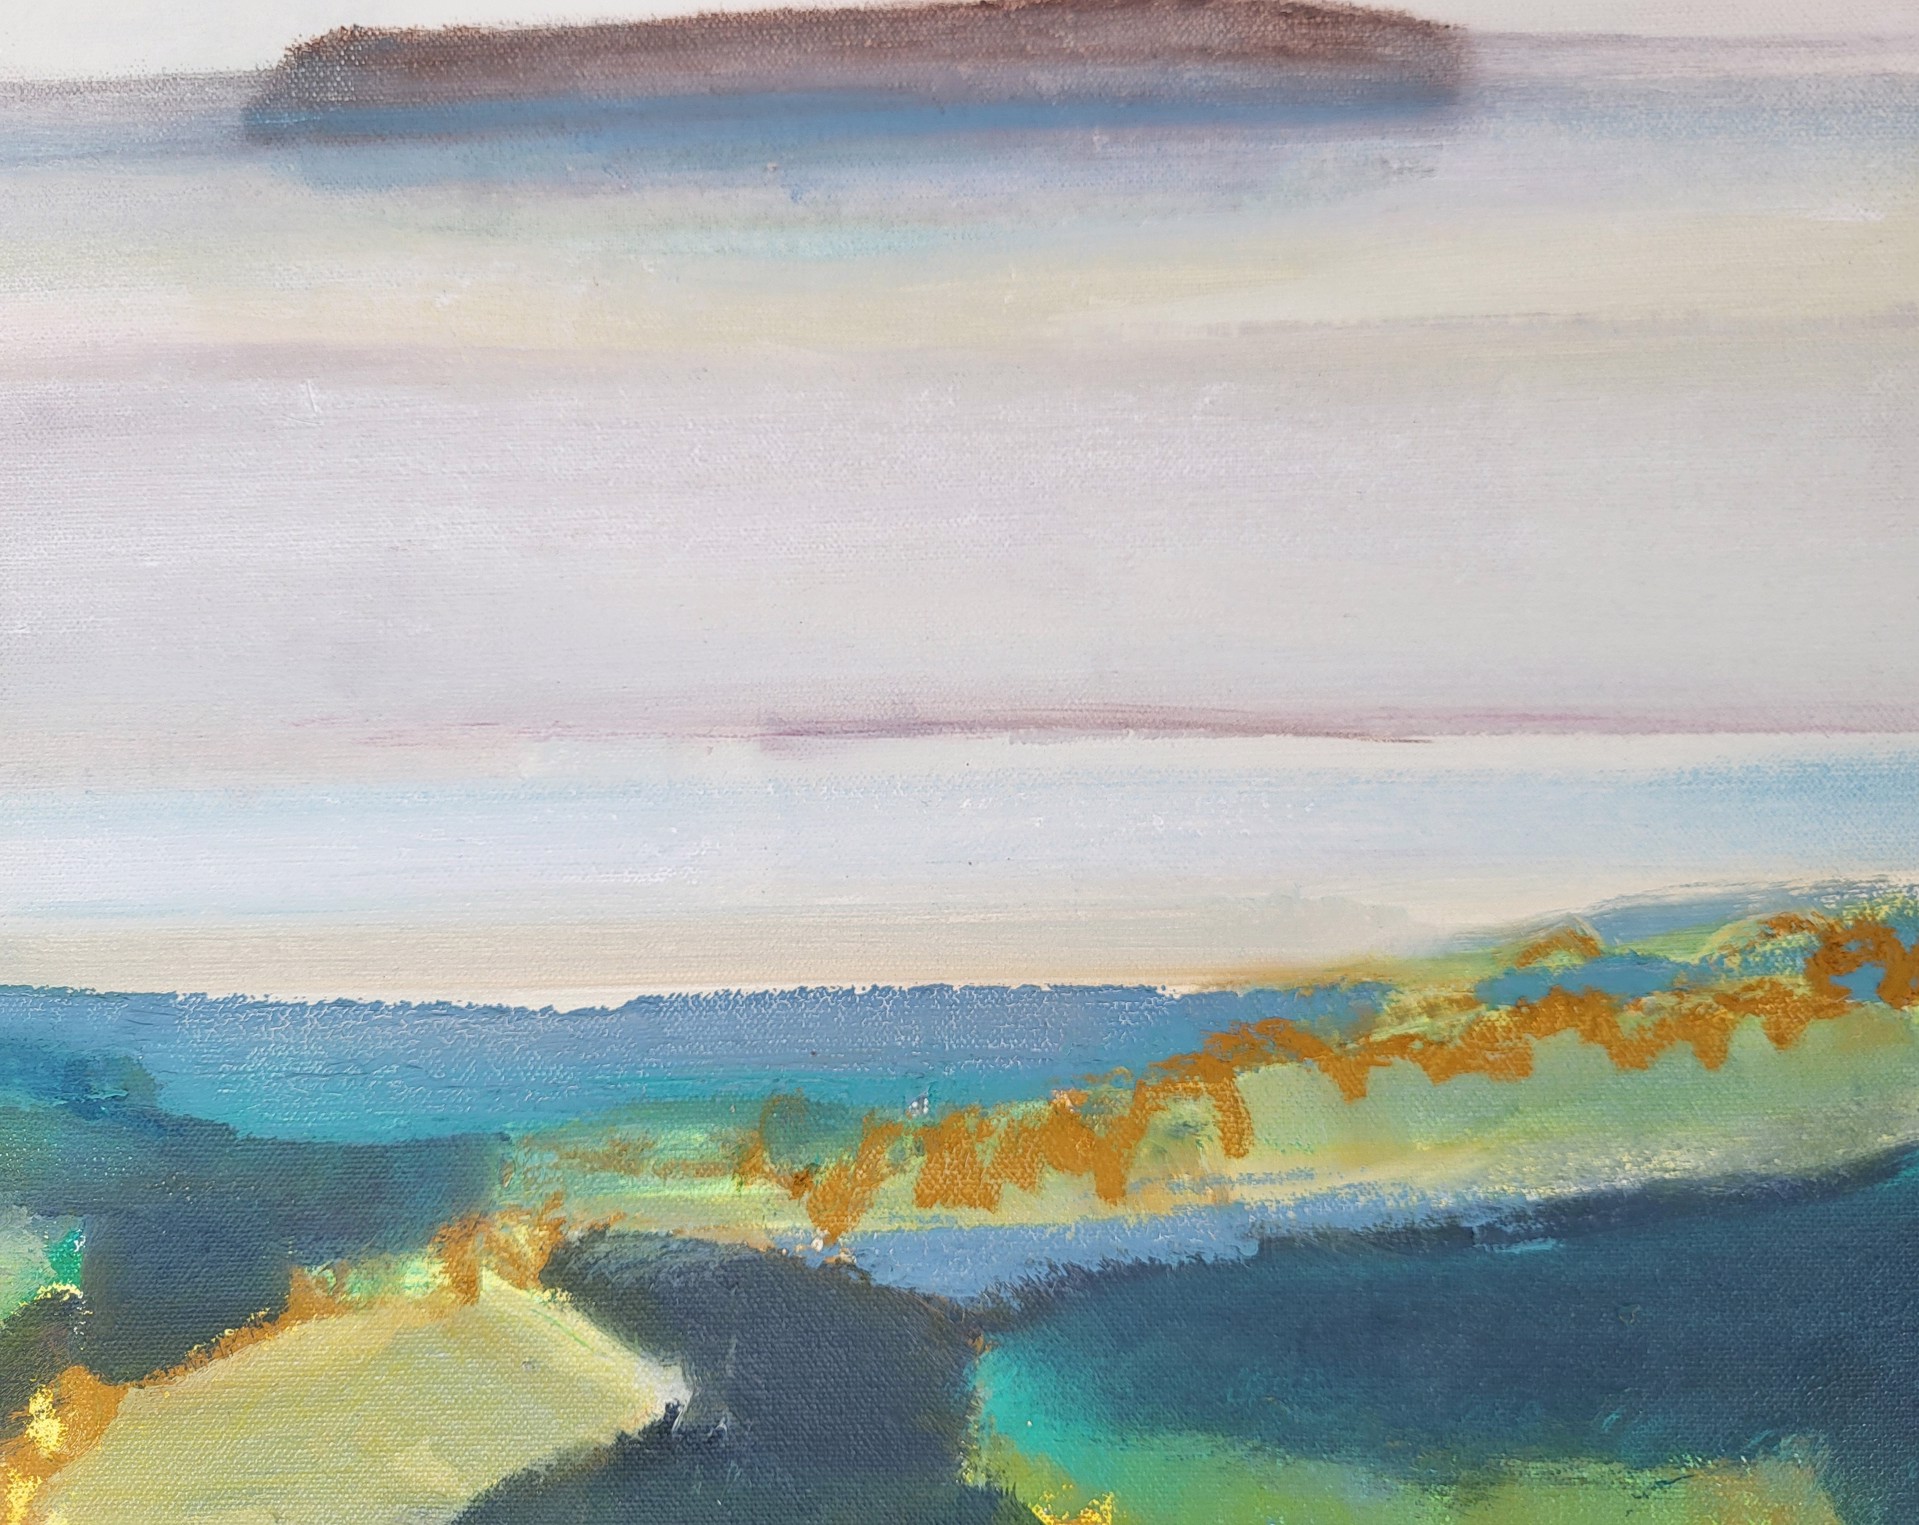 ALL I NEED IS THE SMELL OF THE SEA II by CHRISTINA THWAITES (Landscape)